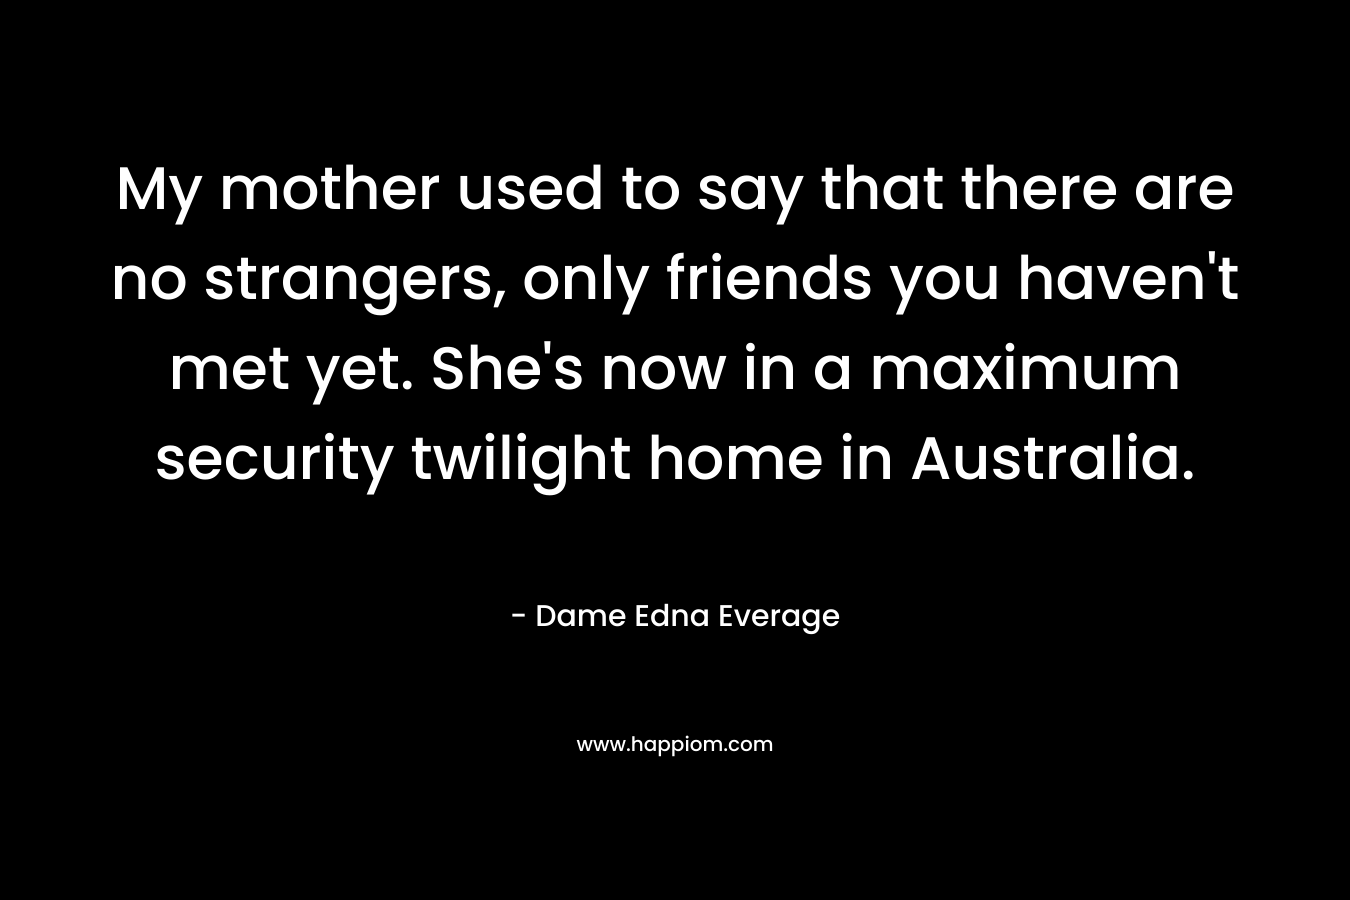 My mother used to say that there are no strangers, only friends you haven't met yet. She's now in a maximum security twilight home in Australia.